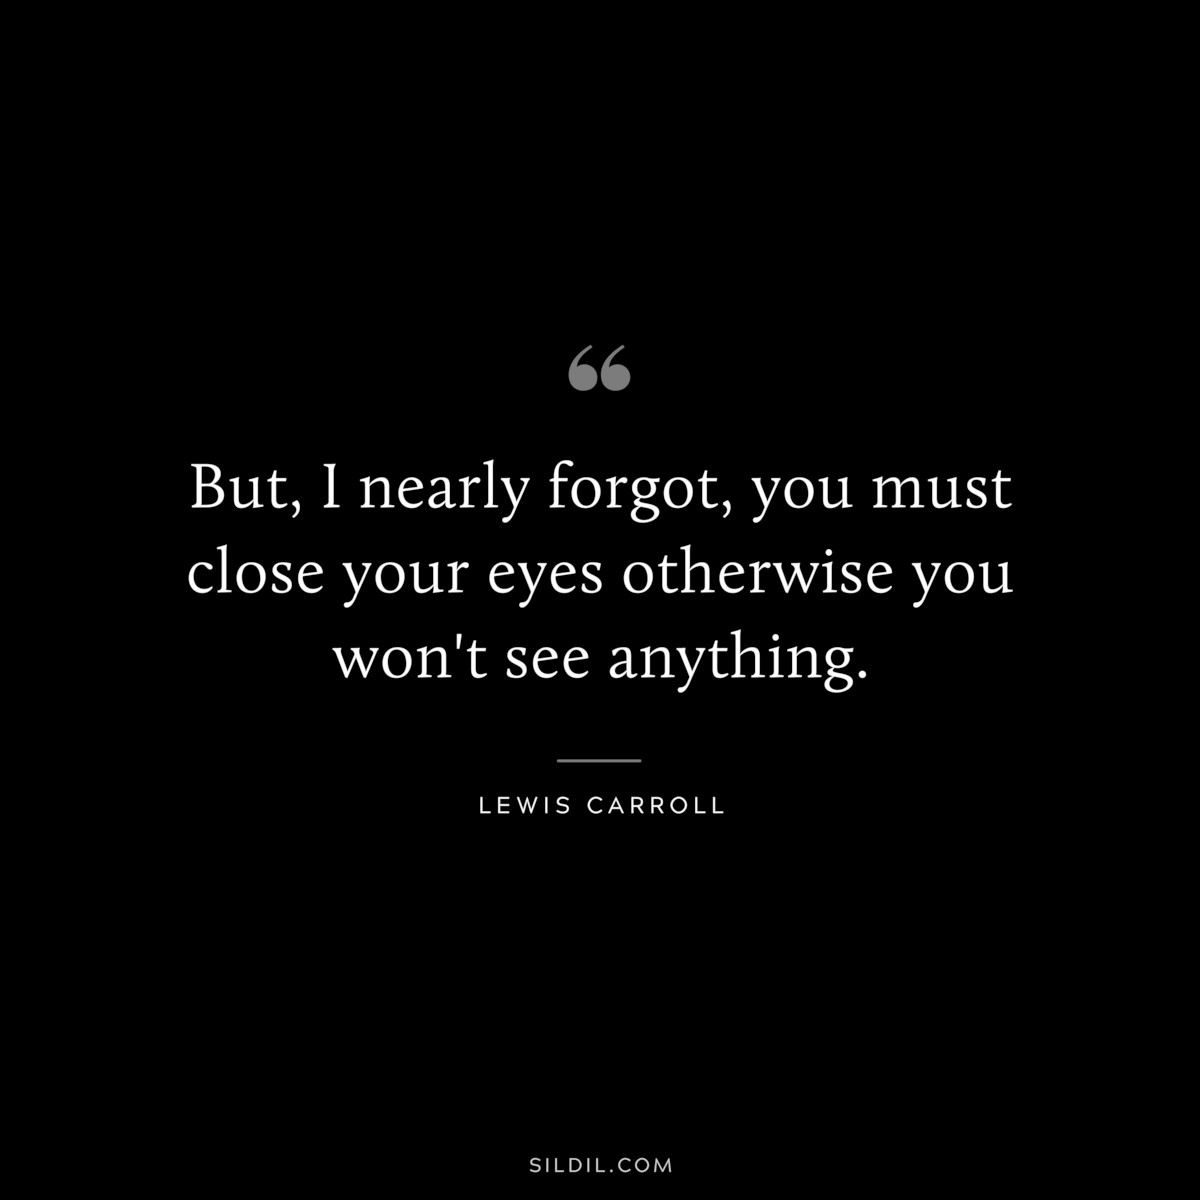 But, I nearly forgot, you must close your eyes otherwise you won't see anything.